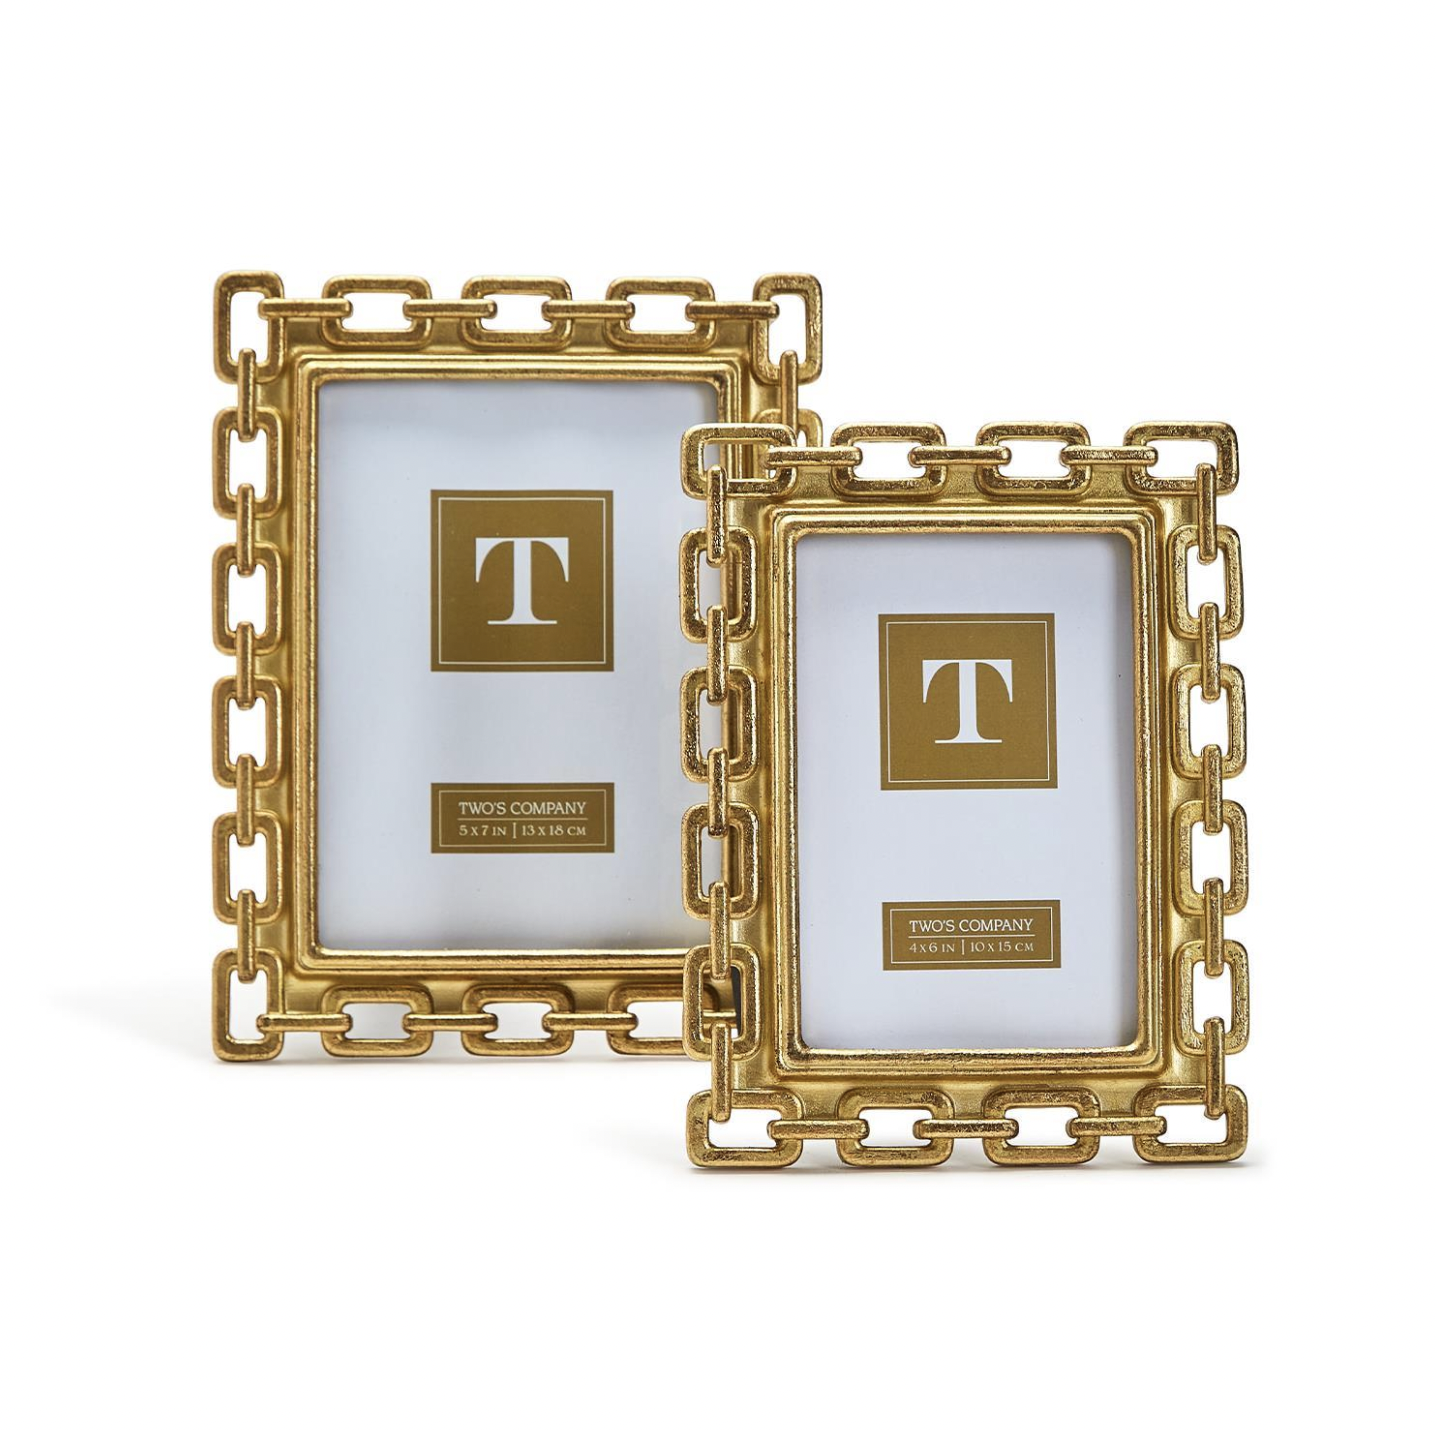 TWO'S COMPANY GOLD CHAIN PHOTO FRAMES